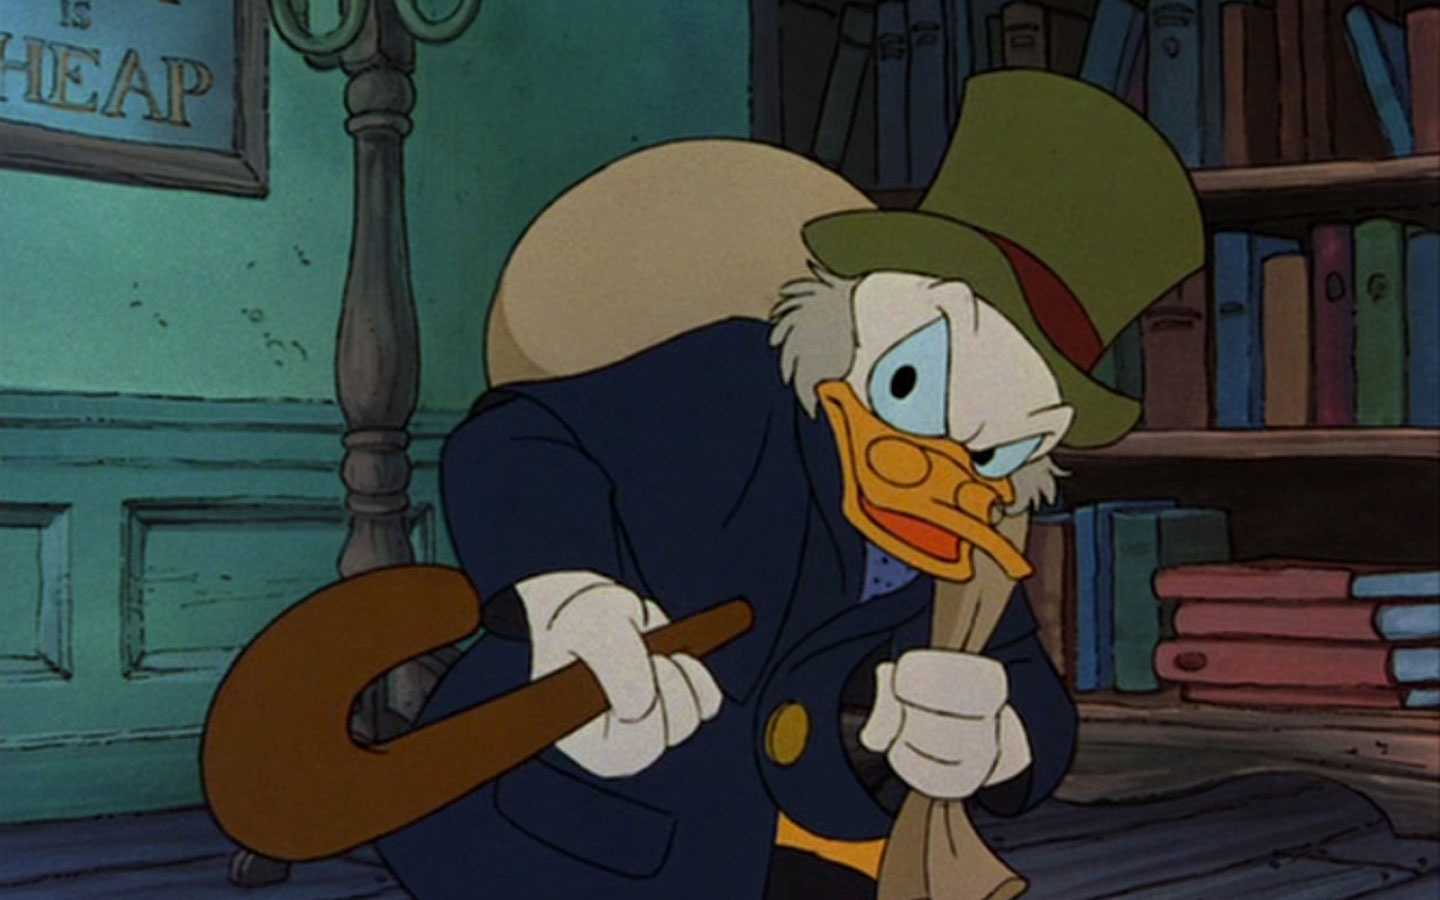 Scrooge McDuck scowls at the camera. Photo courtesy of: http://vignette2.wikia.nocookie.net/disney/images/9/9f/Uncle-scrooge-mcduck-36749825-1440-900.jpg/revision/latest?cb=20140414073952